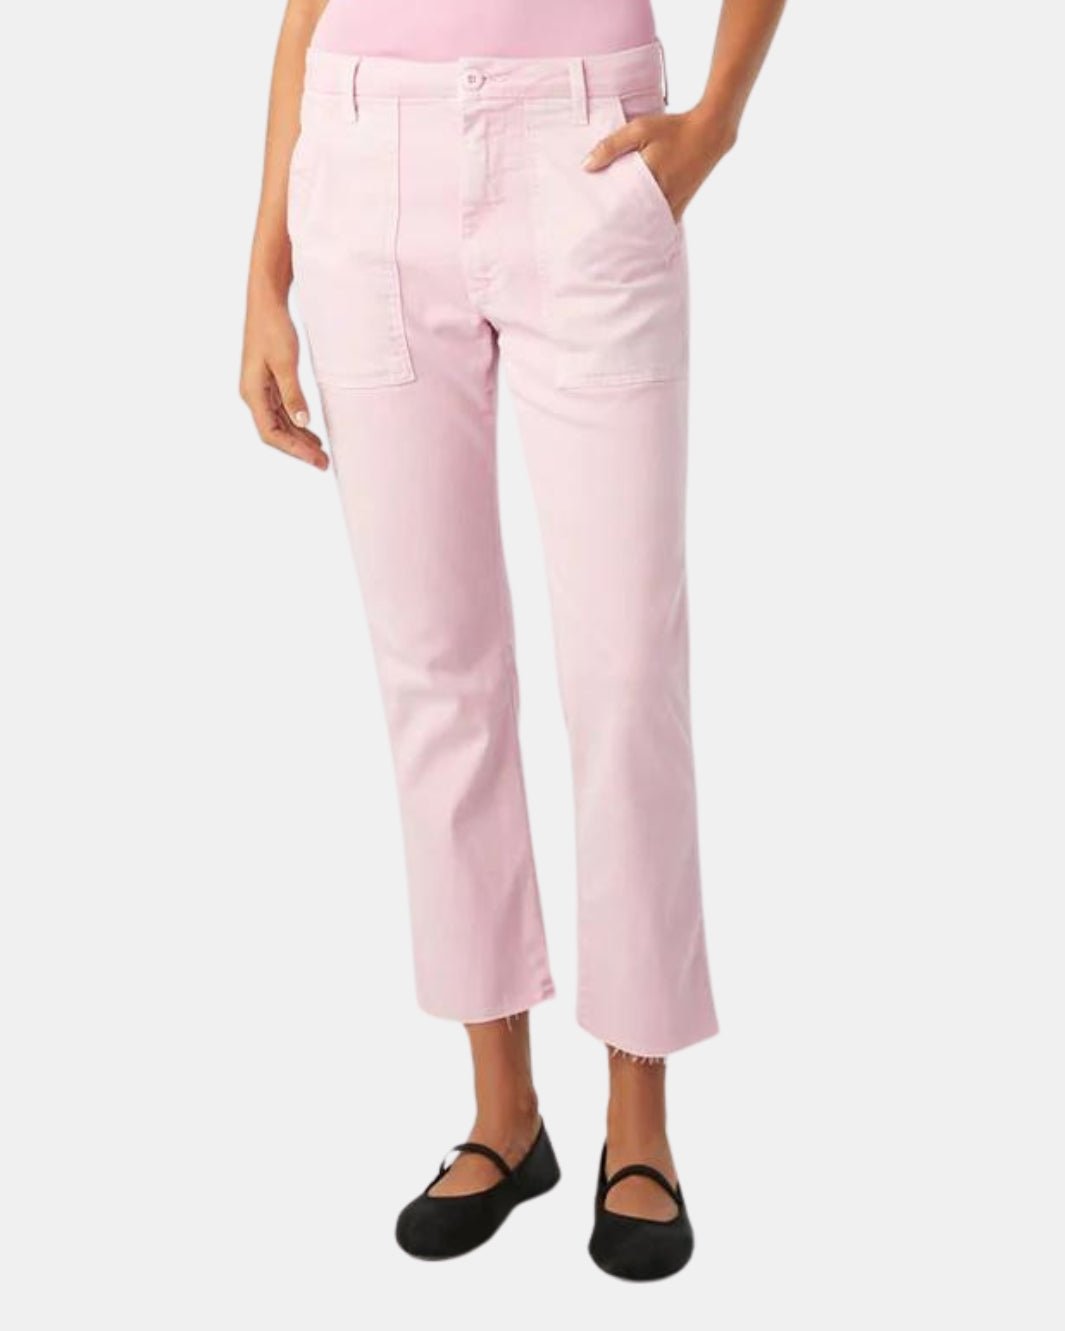 EASY ARMY TROUSER IN LIGHT PEONY - Romi Boutique